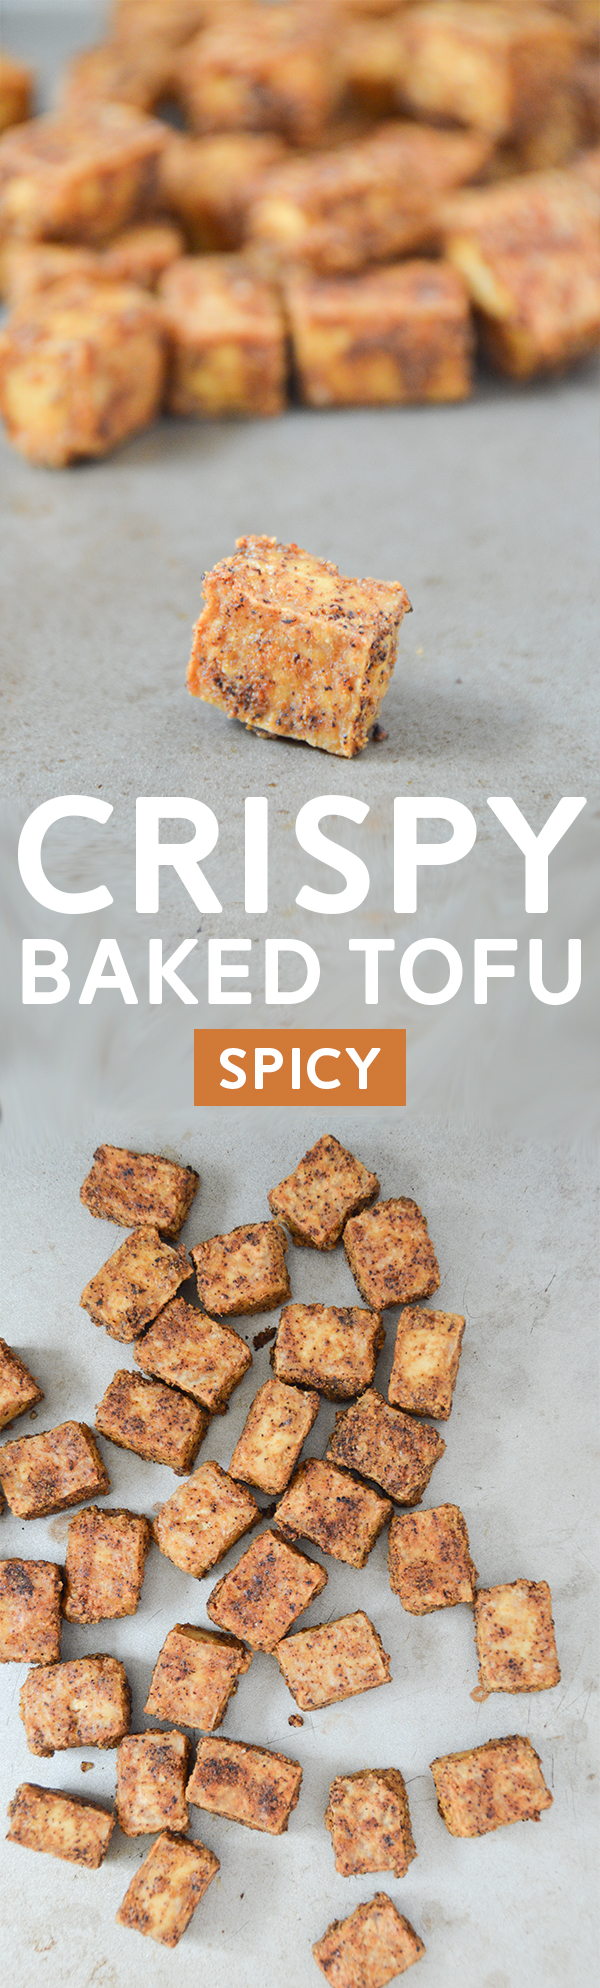 Spicy Baked Tofu — Crispy! This easy spicy baked tofu is perfect for plant-based burrito bowls or other similar dishes. #vegan #veganrecipe #tofurecipe #tofu #plantbased